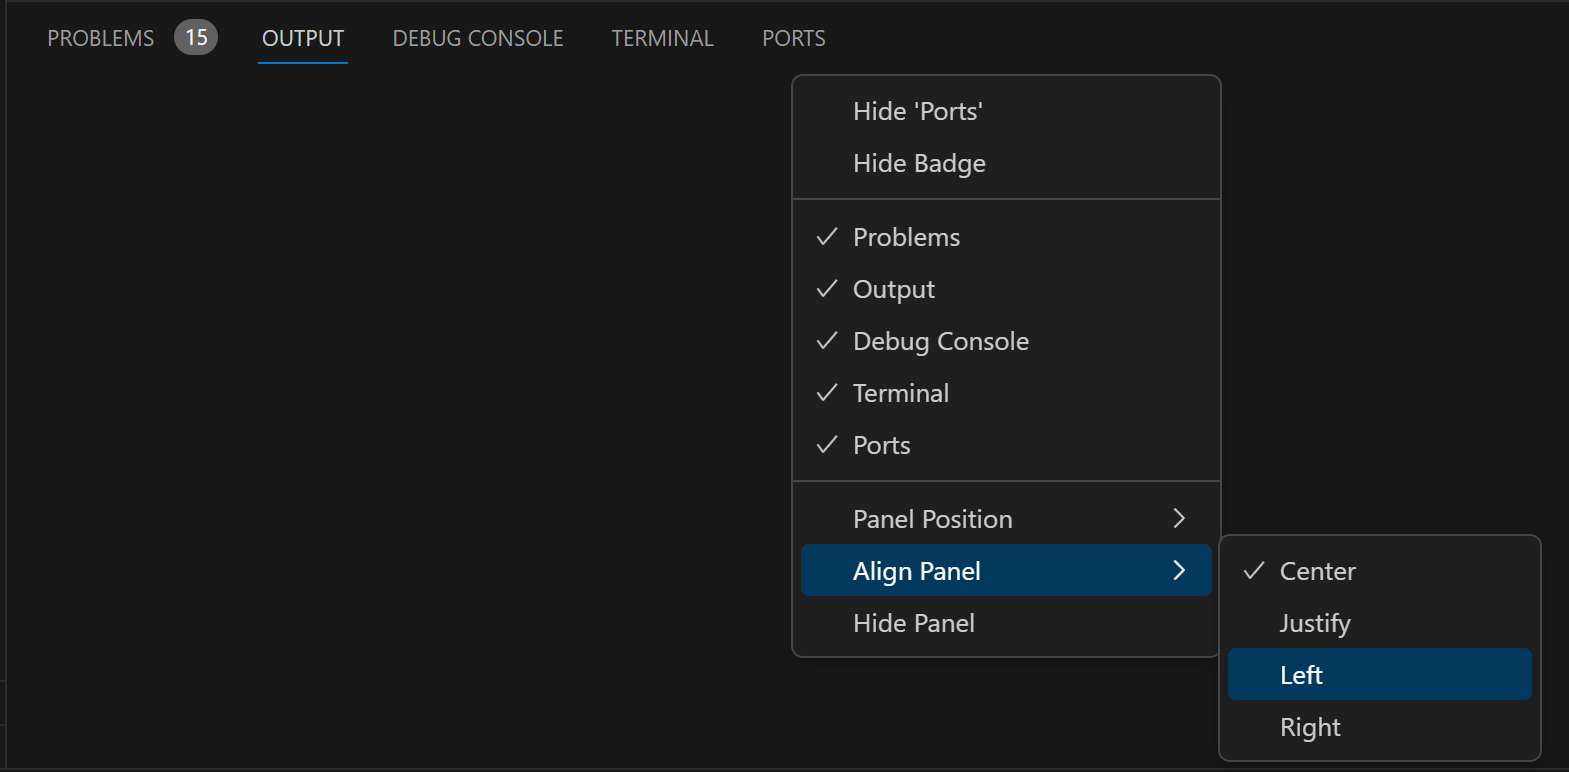 Align Panel options from Panel title context menu